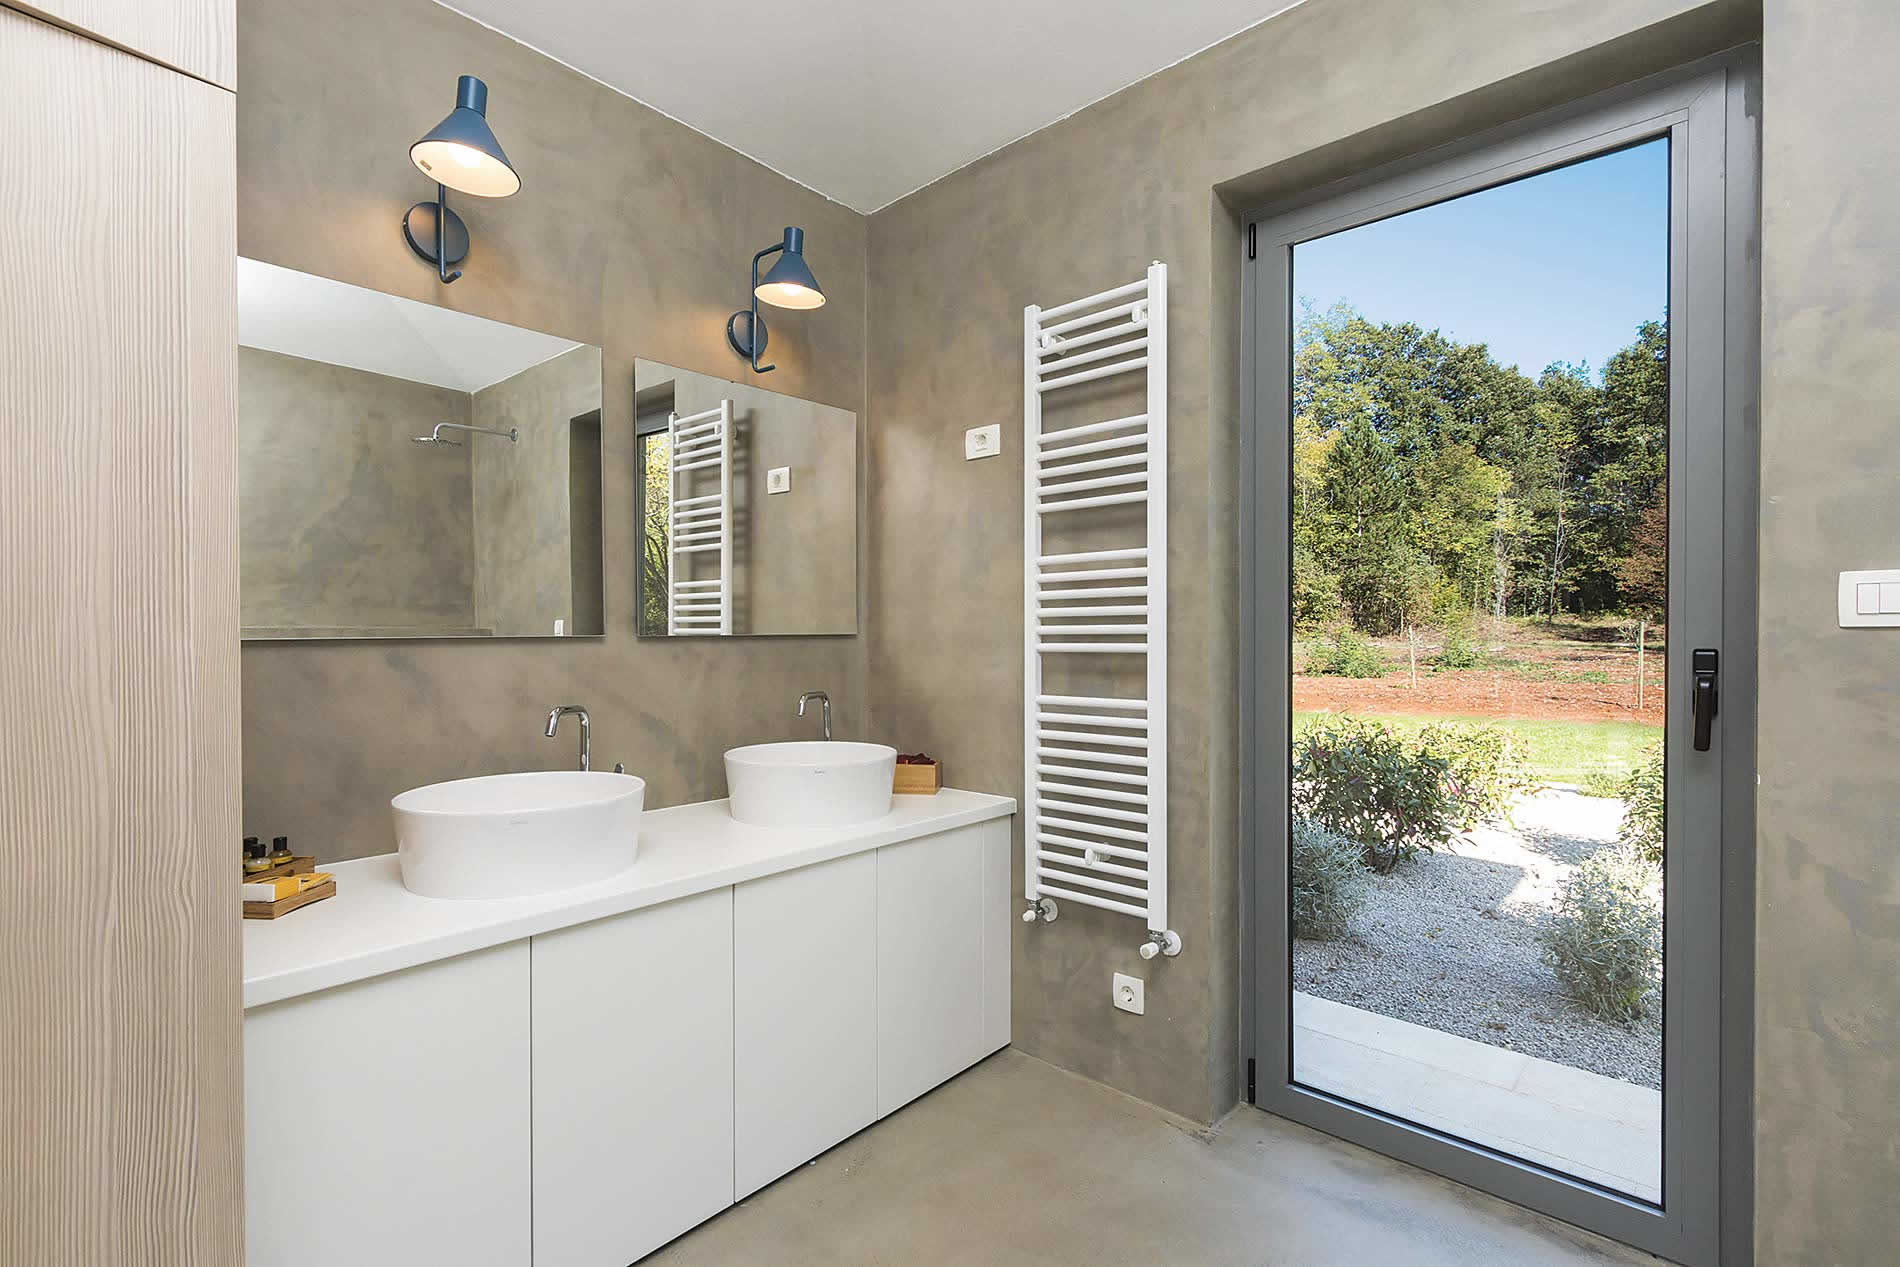 The master bathroom has its own access to the gardens and to the pool